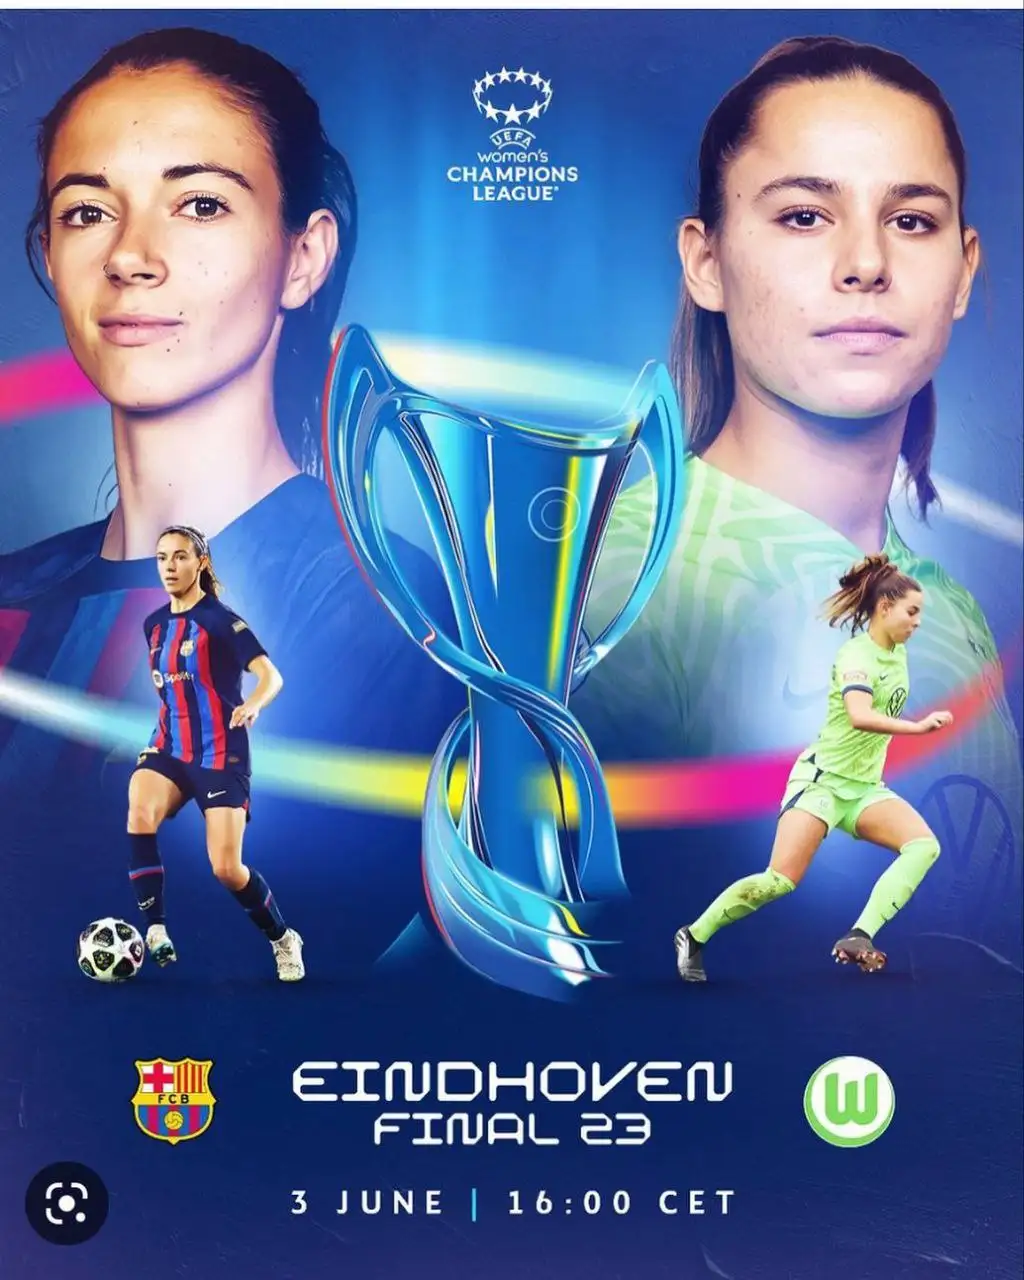 FC Barcelona women are set to go head to head with Wolfsburg women in the UEFA Women's Champions League finals